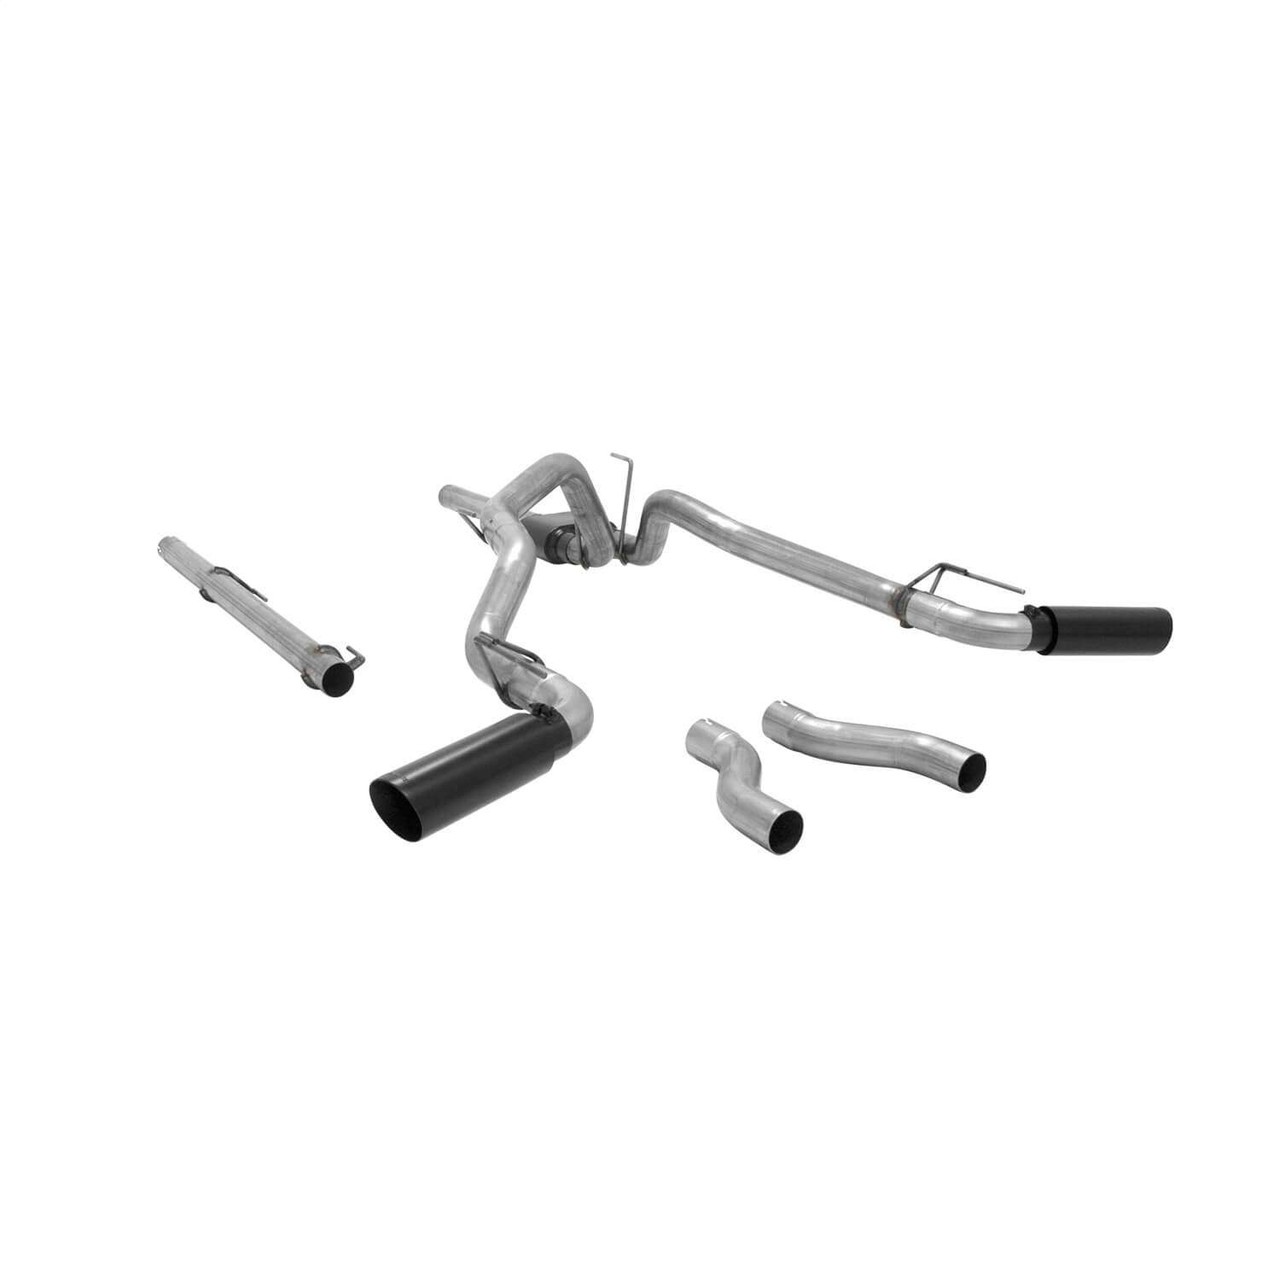 Flowmaster Outlaw Series Cat Back Exhaust System 817690 Free Shipping!